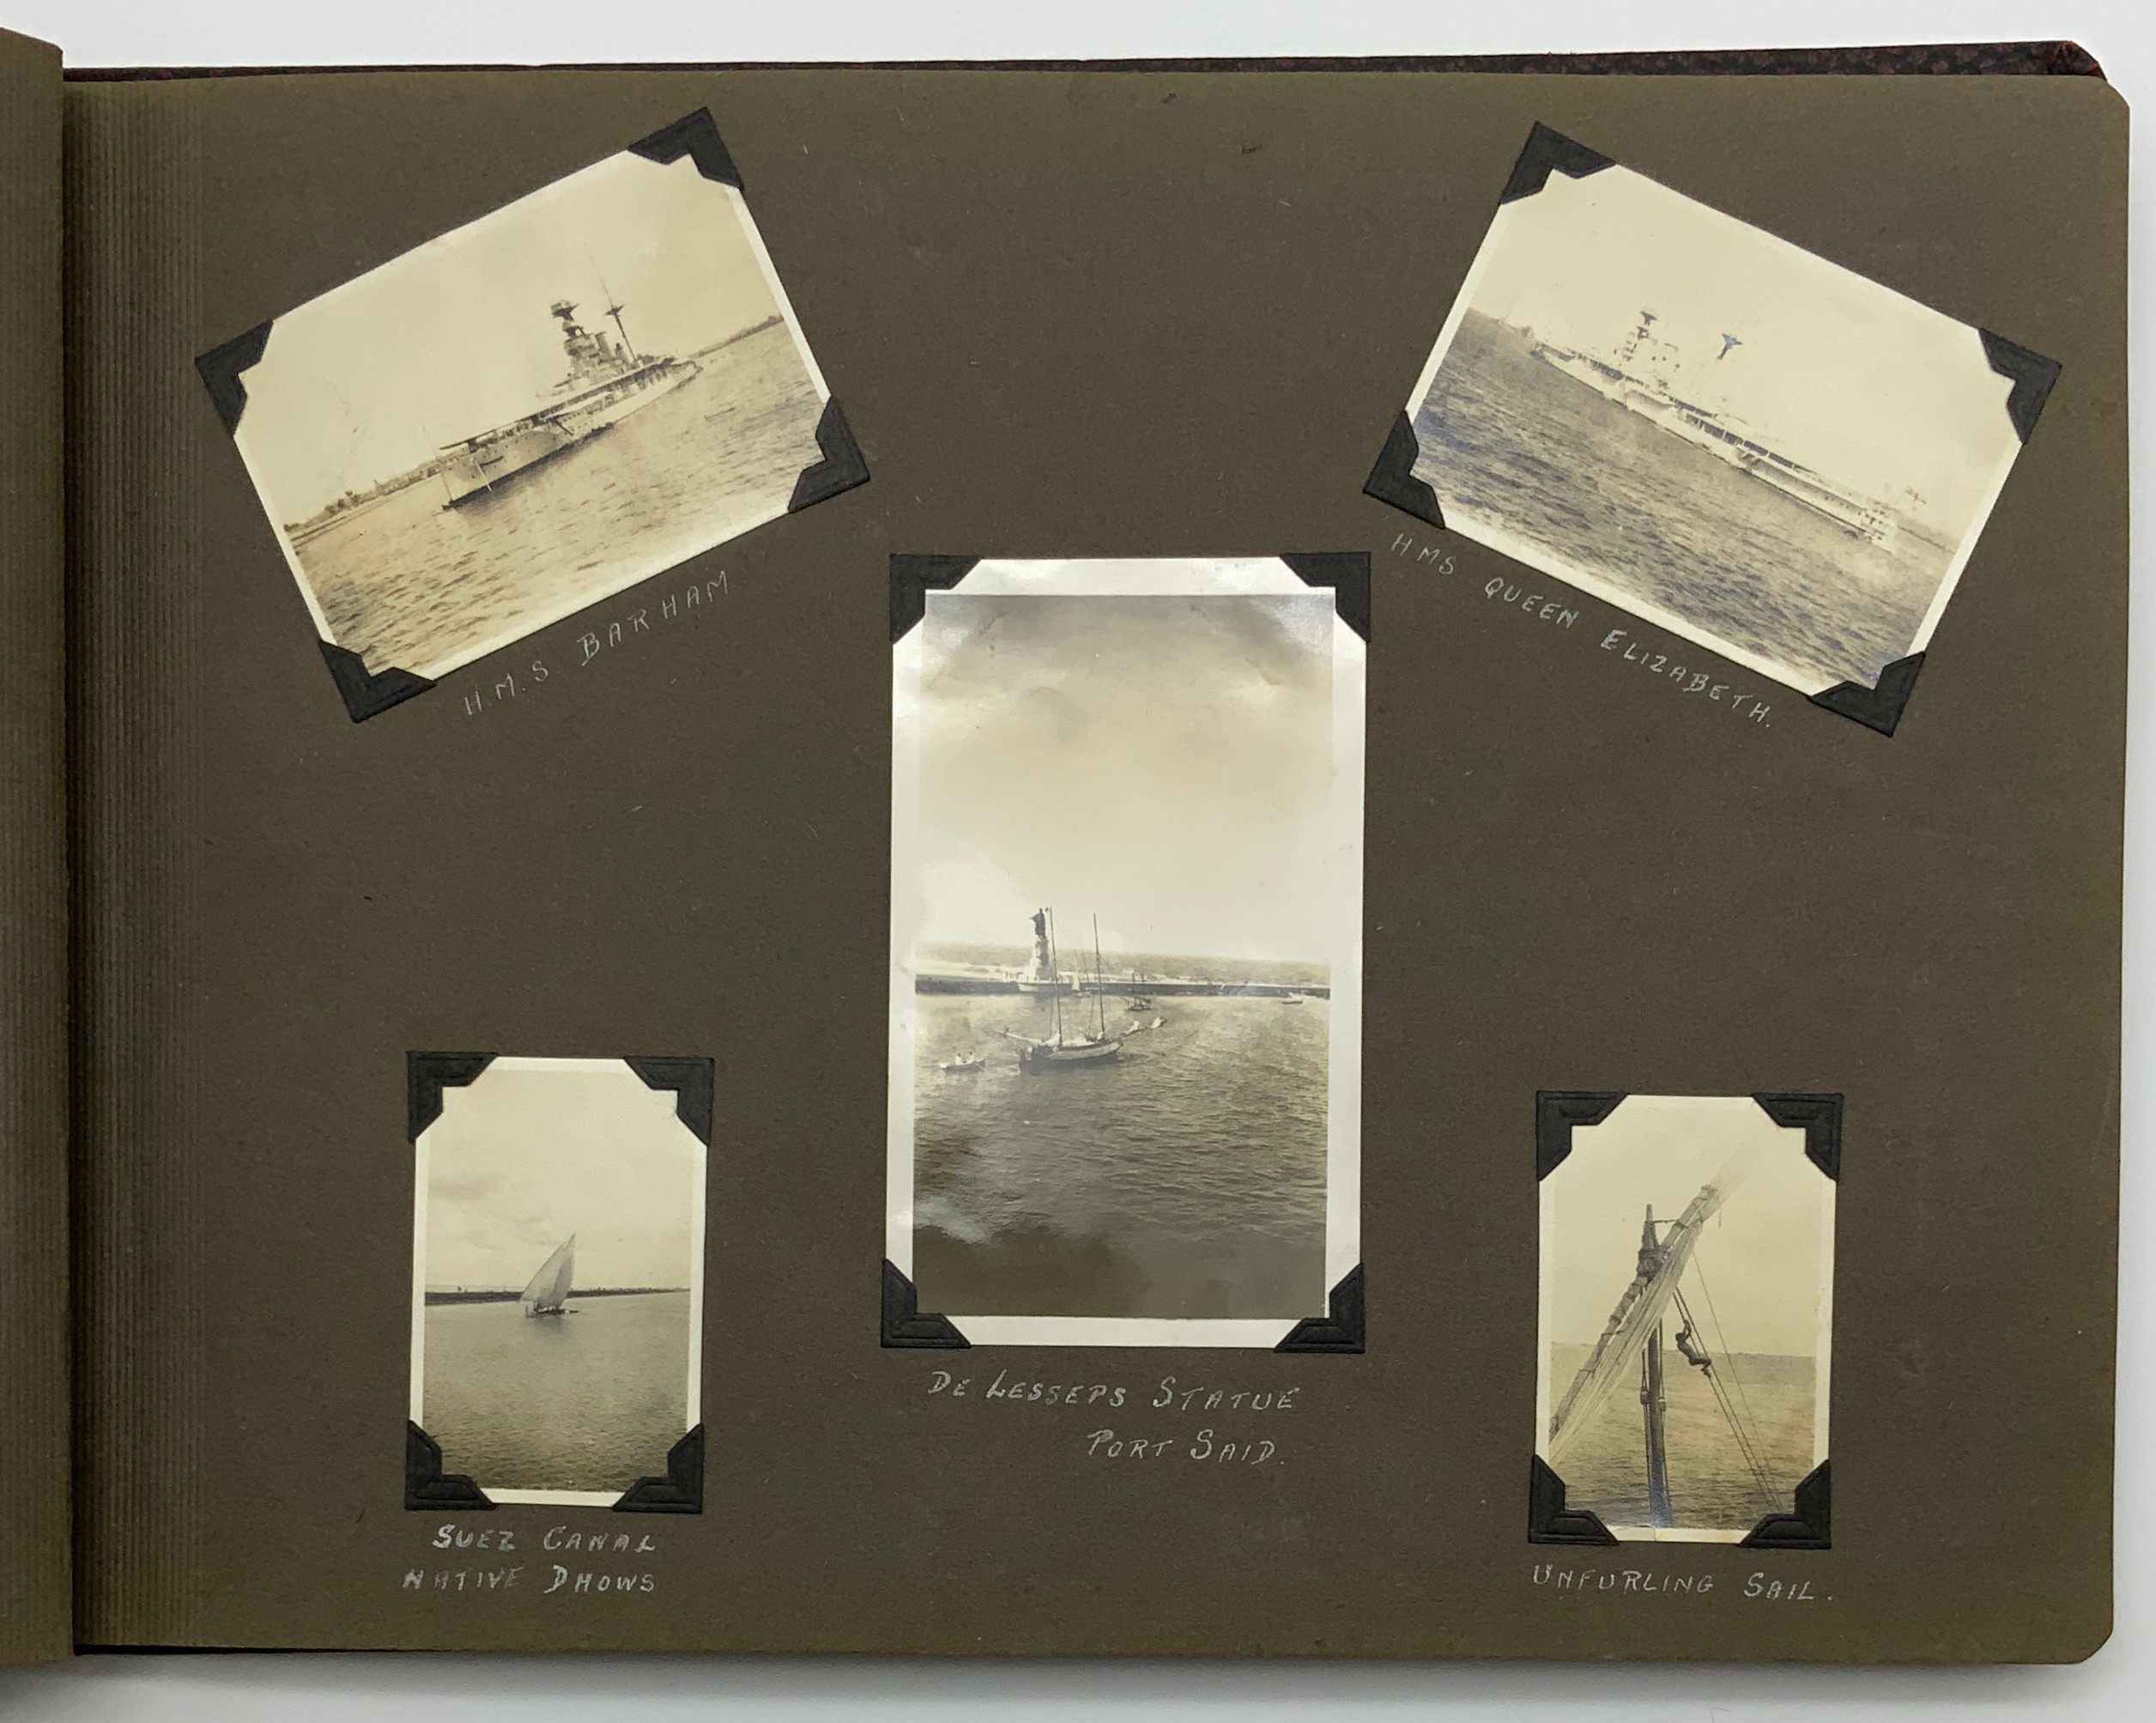 VINTAGE PHOTO ALBUM WITH PHOTOGRAPHS (NAVY) - Image 5 of 13